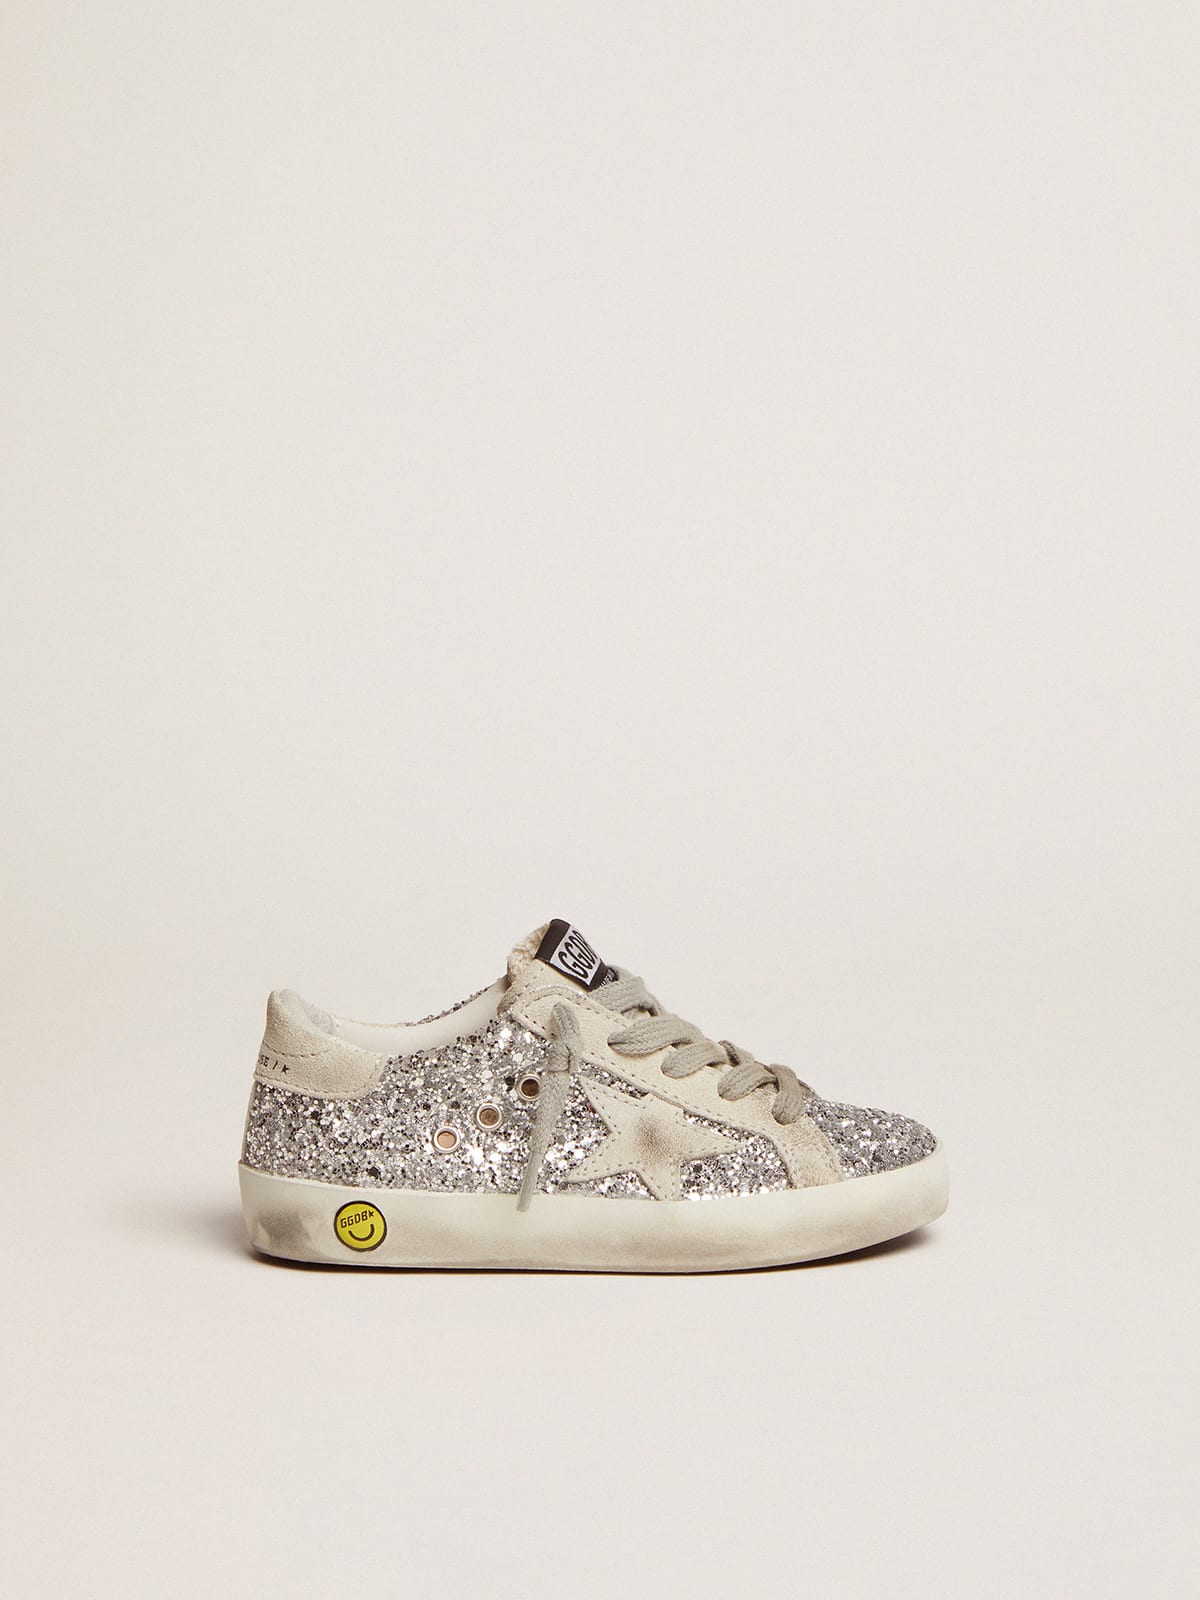 Golden Goose - Junior Super-Star with silver glitter and suede details in 